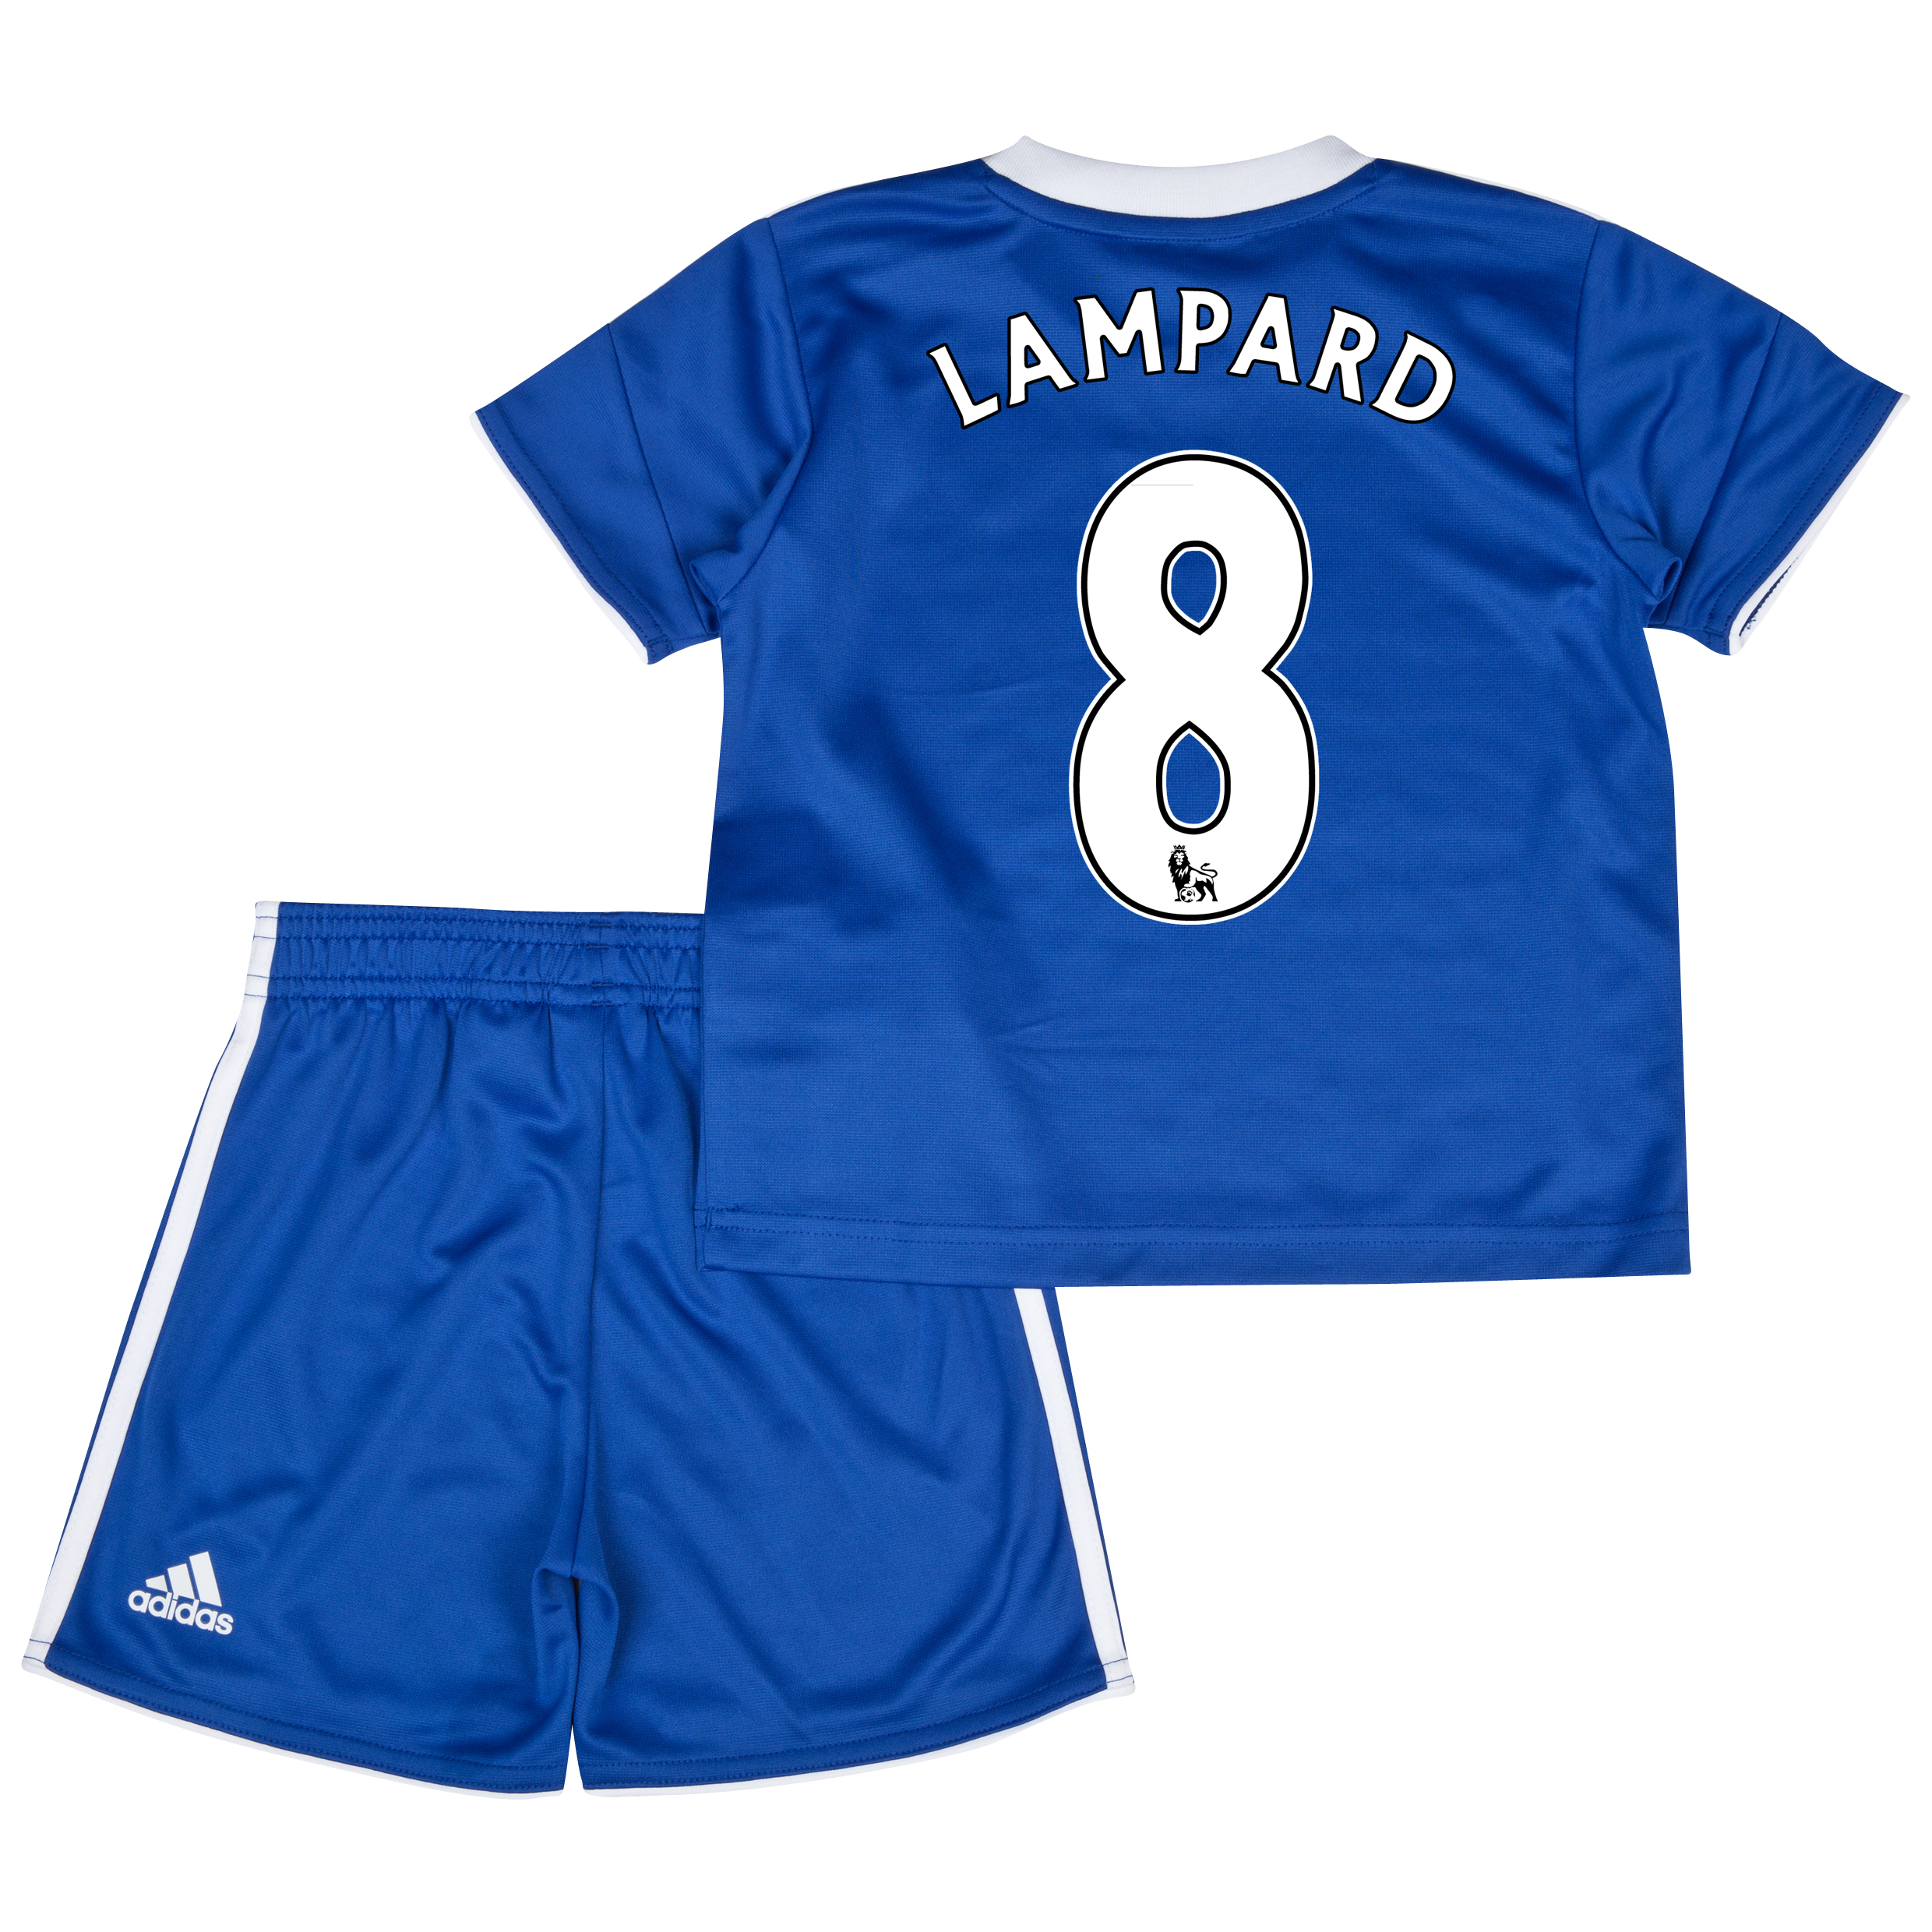 Chelsea Home Mini Kit 2013/14 with Lampard 8 printing